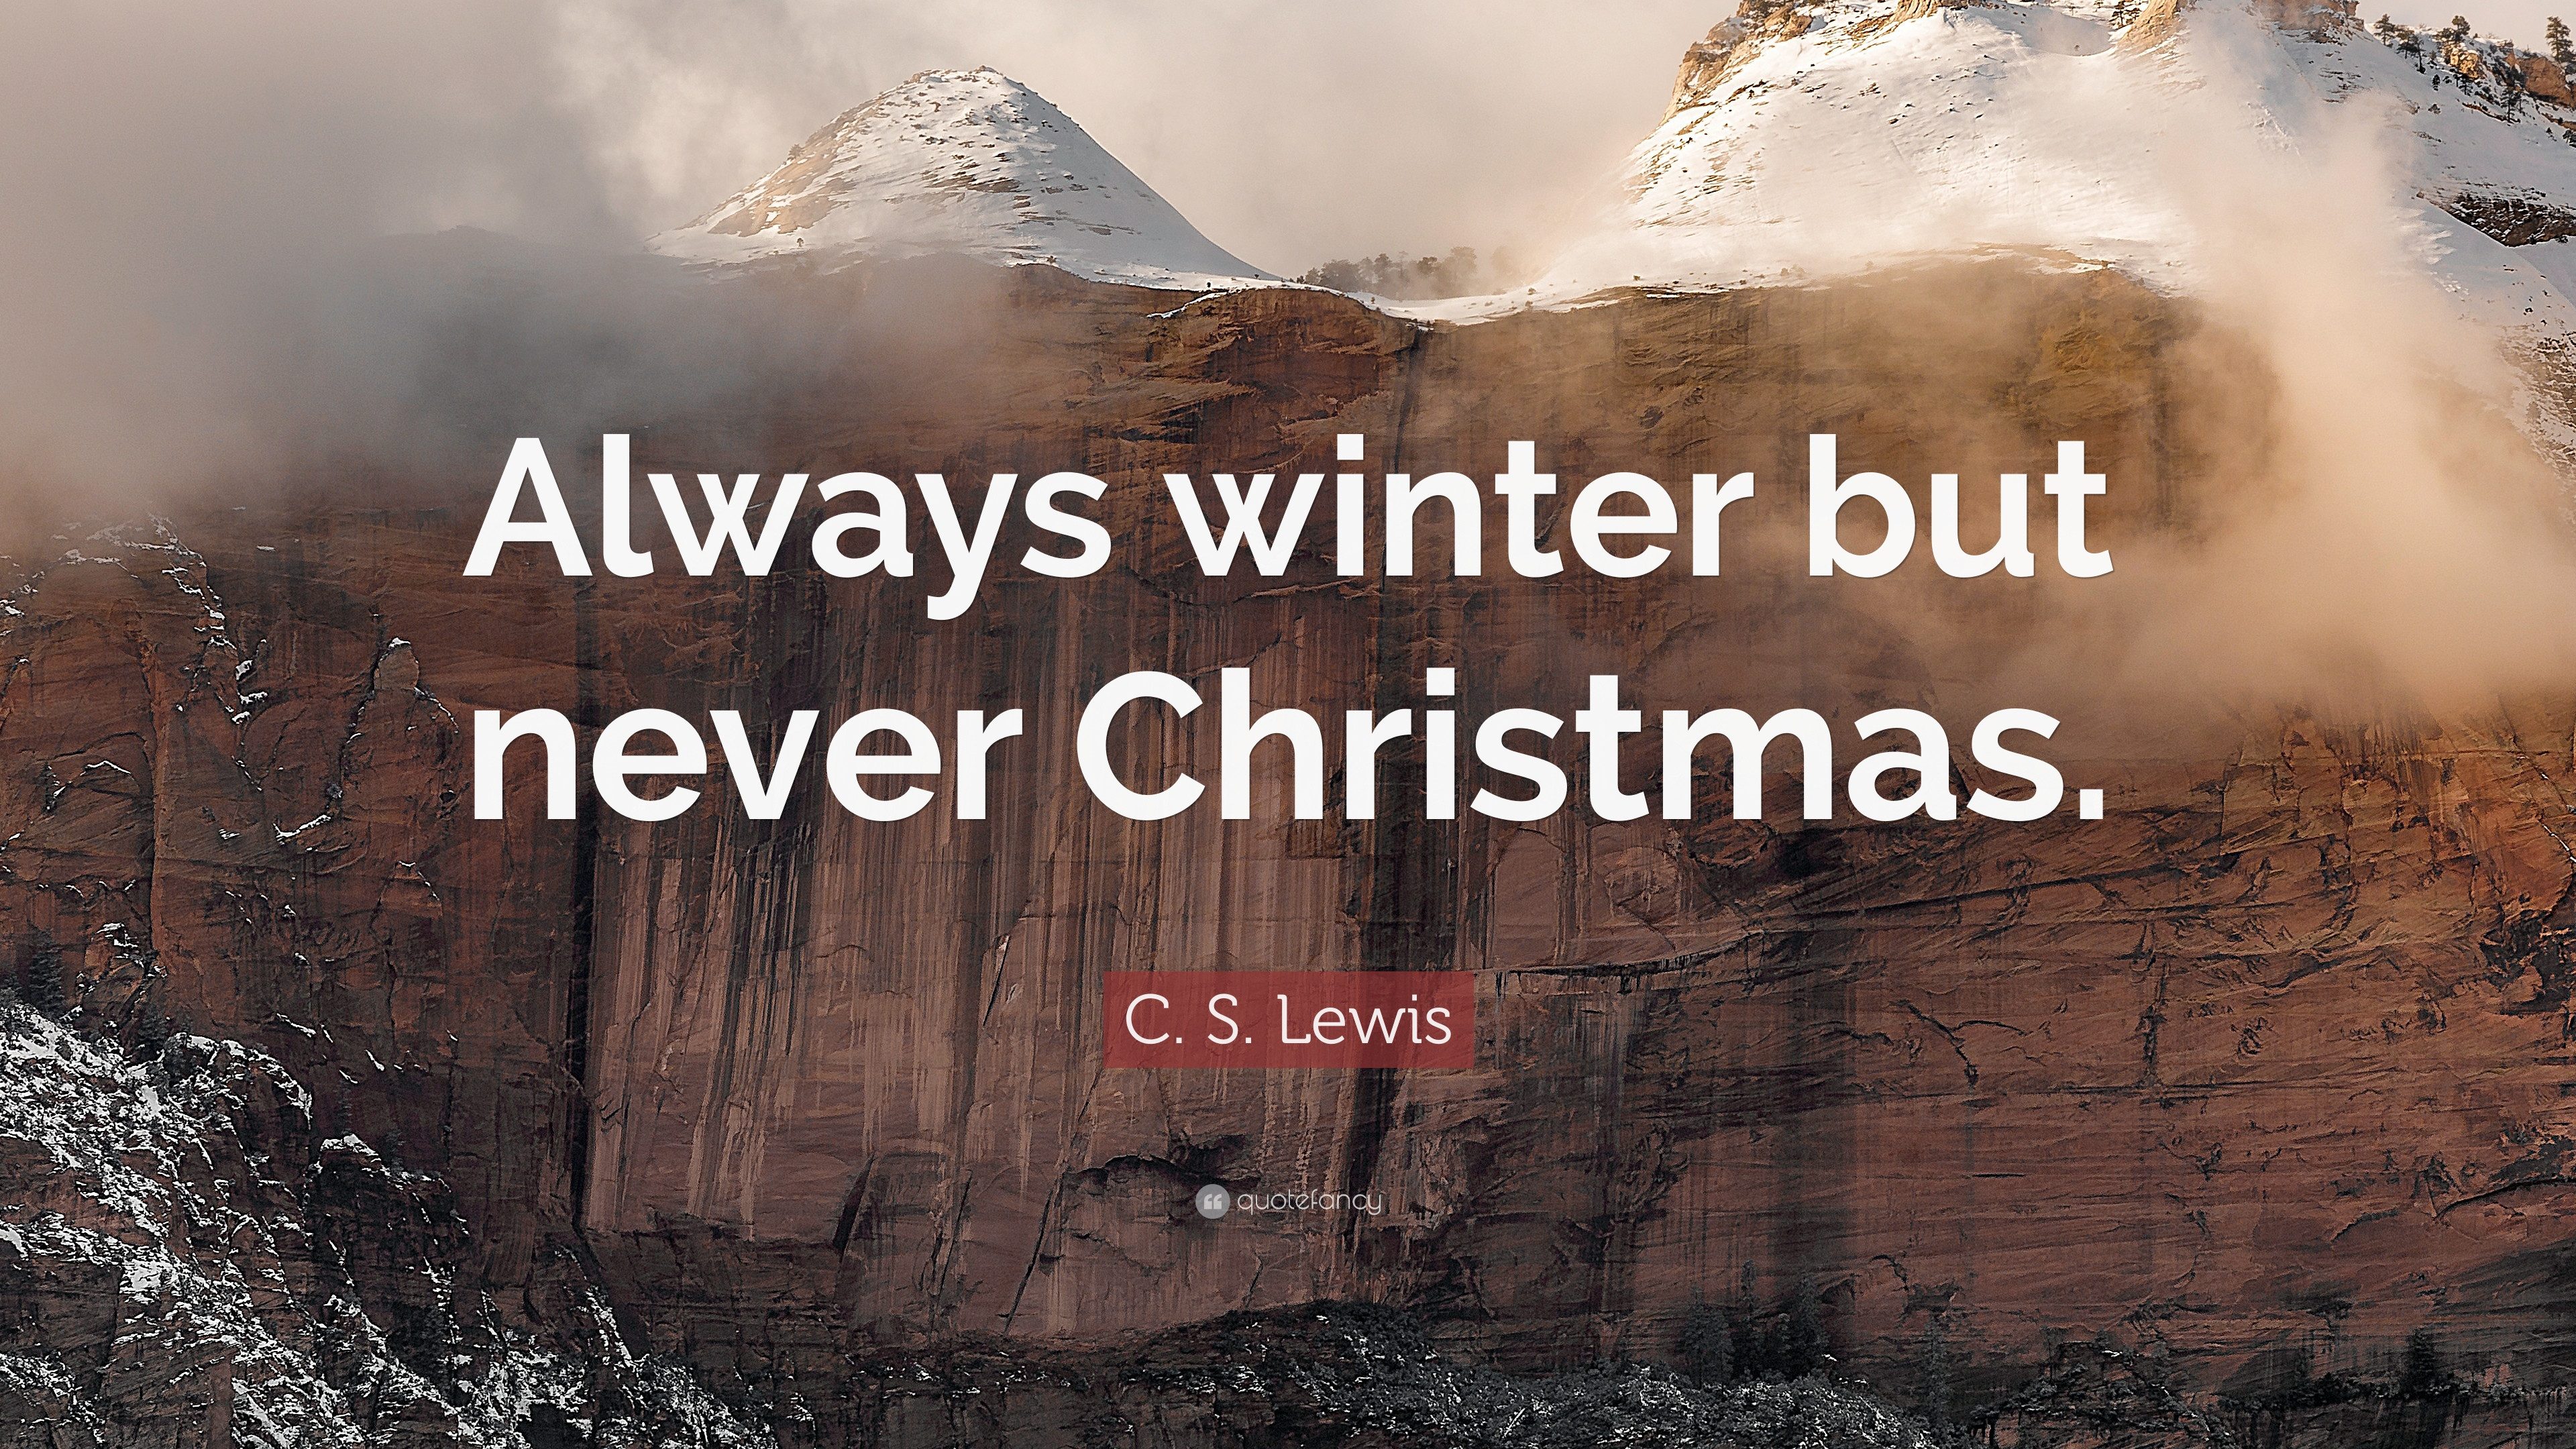 C.S.Lewis Christmas Quote
 C S Lewis Quote “Always winter but never Christmas